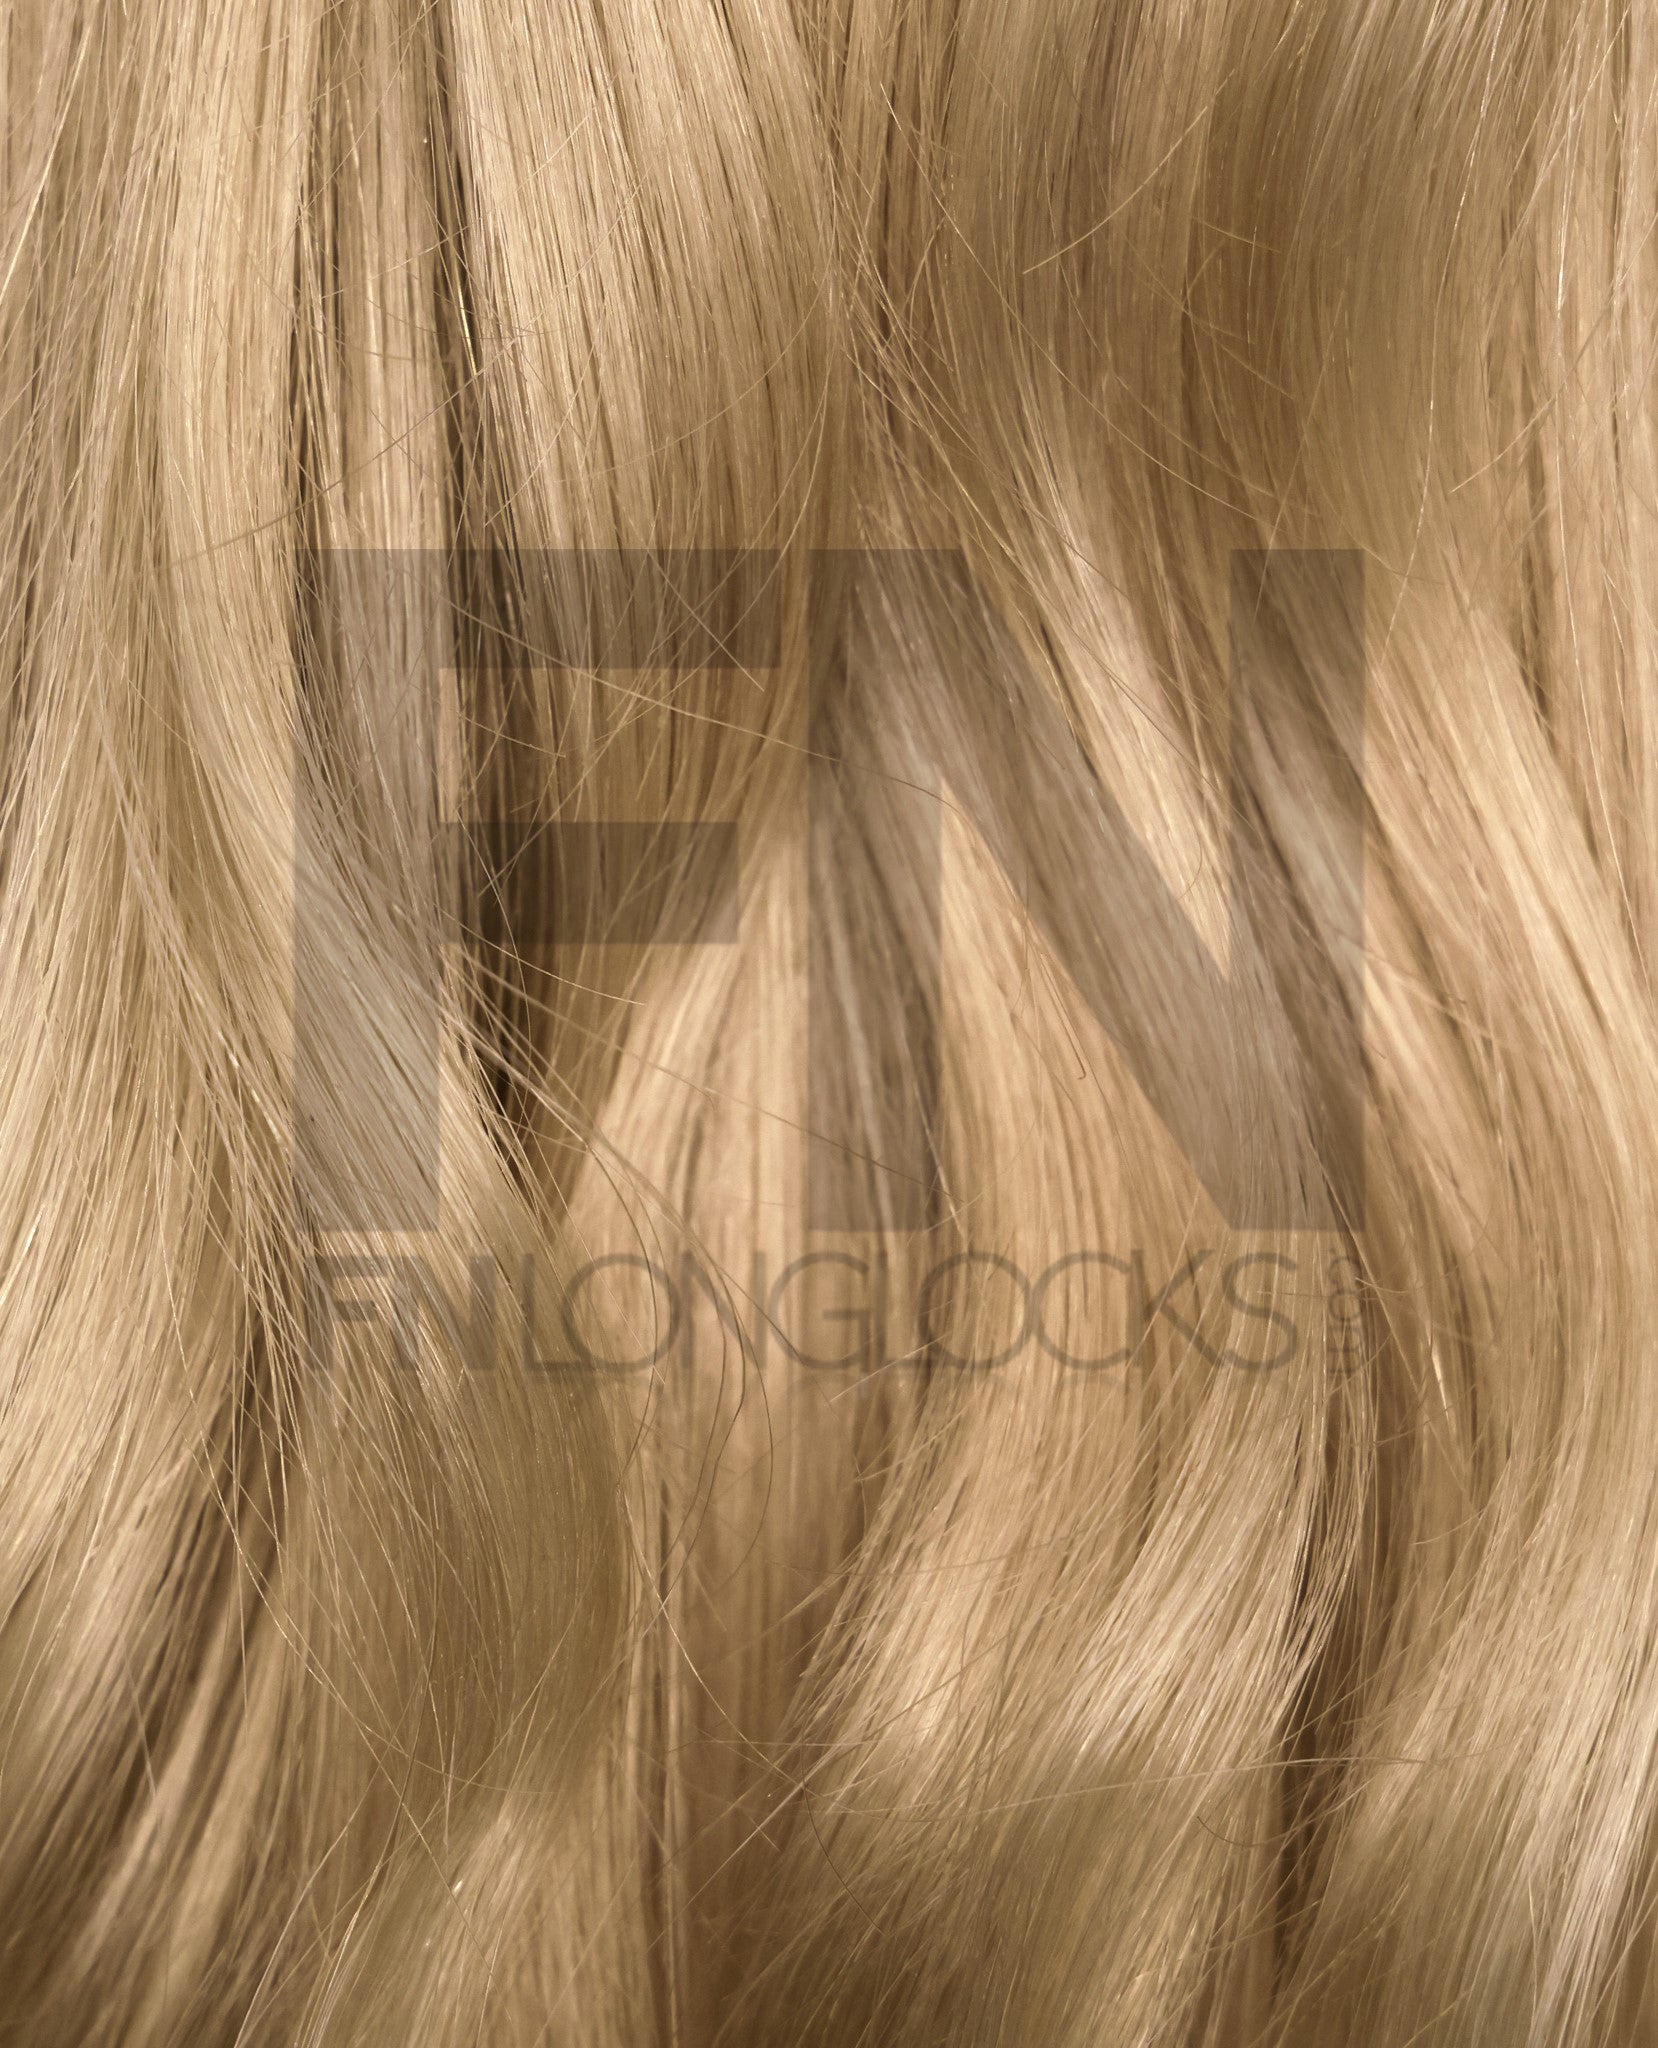 color 18/22 weft extensions